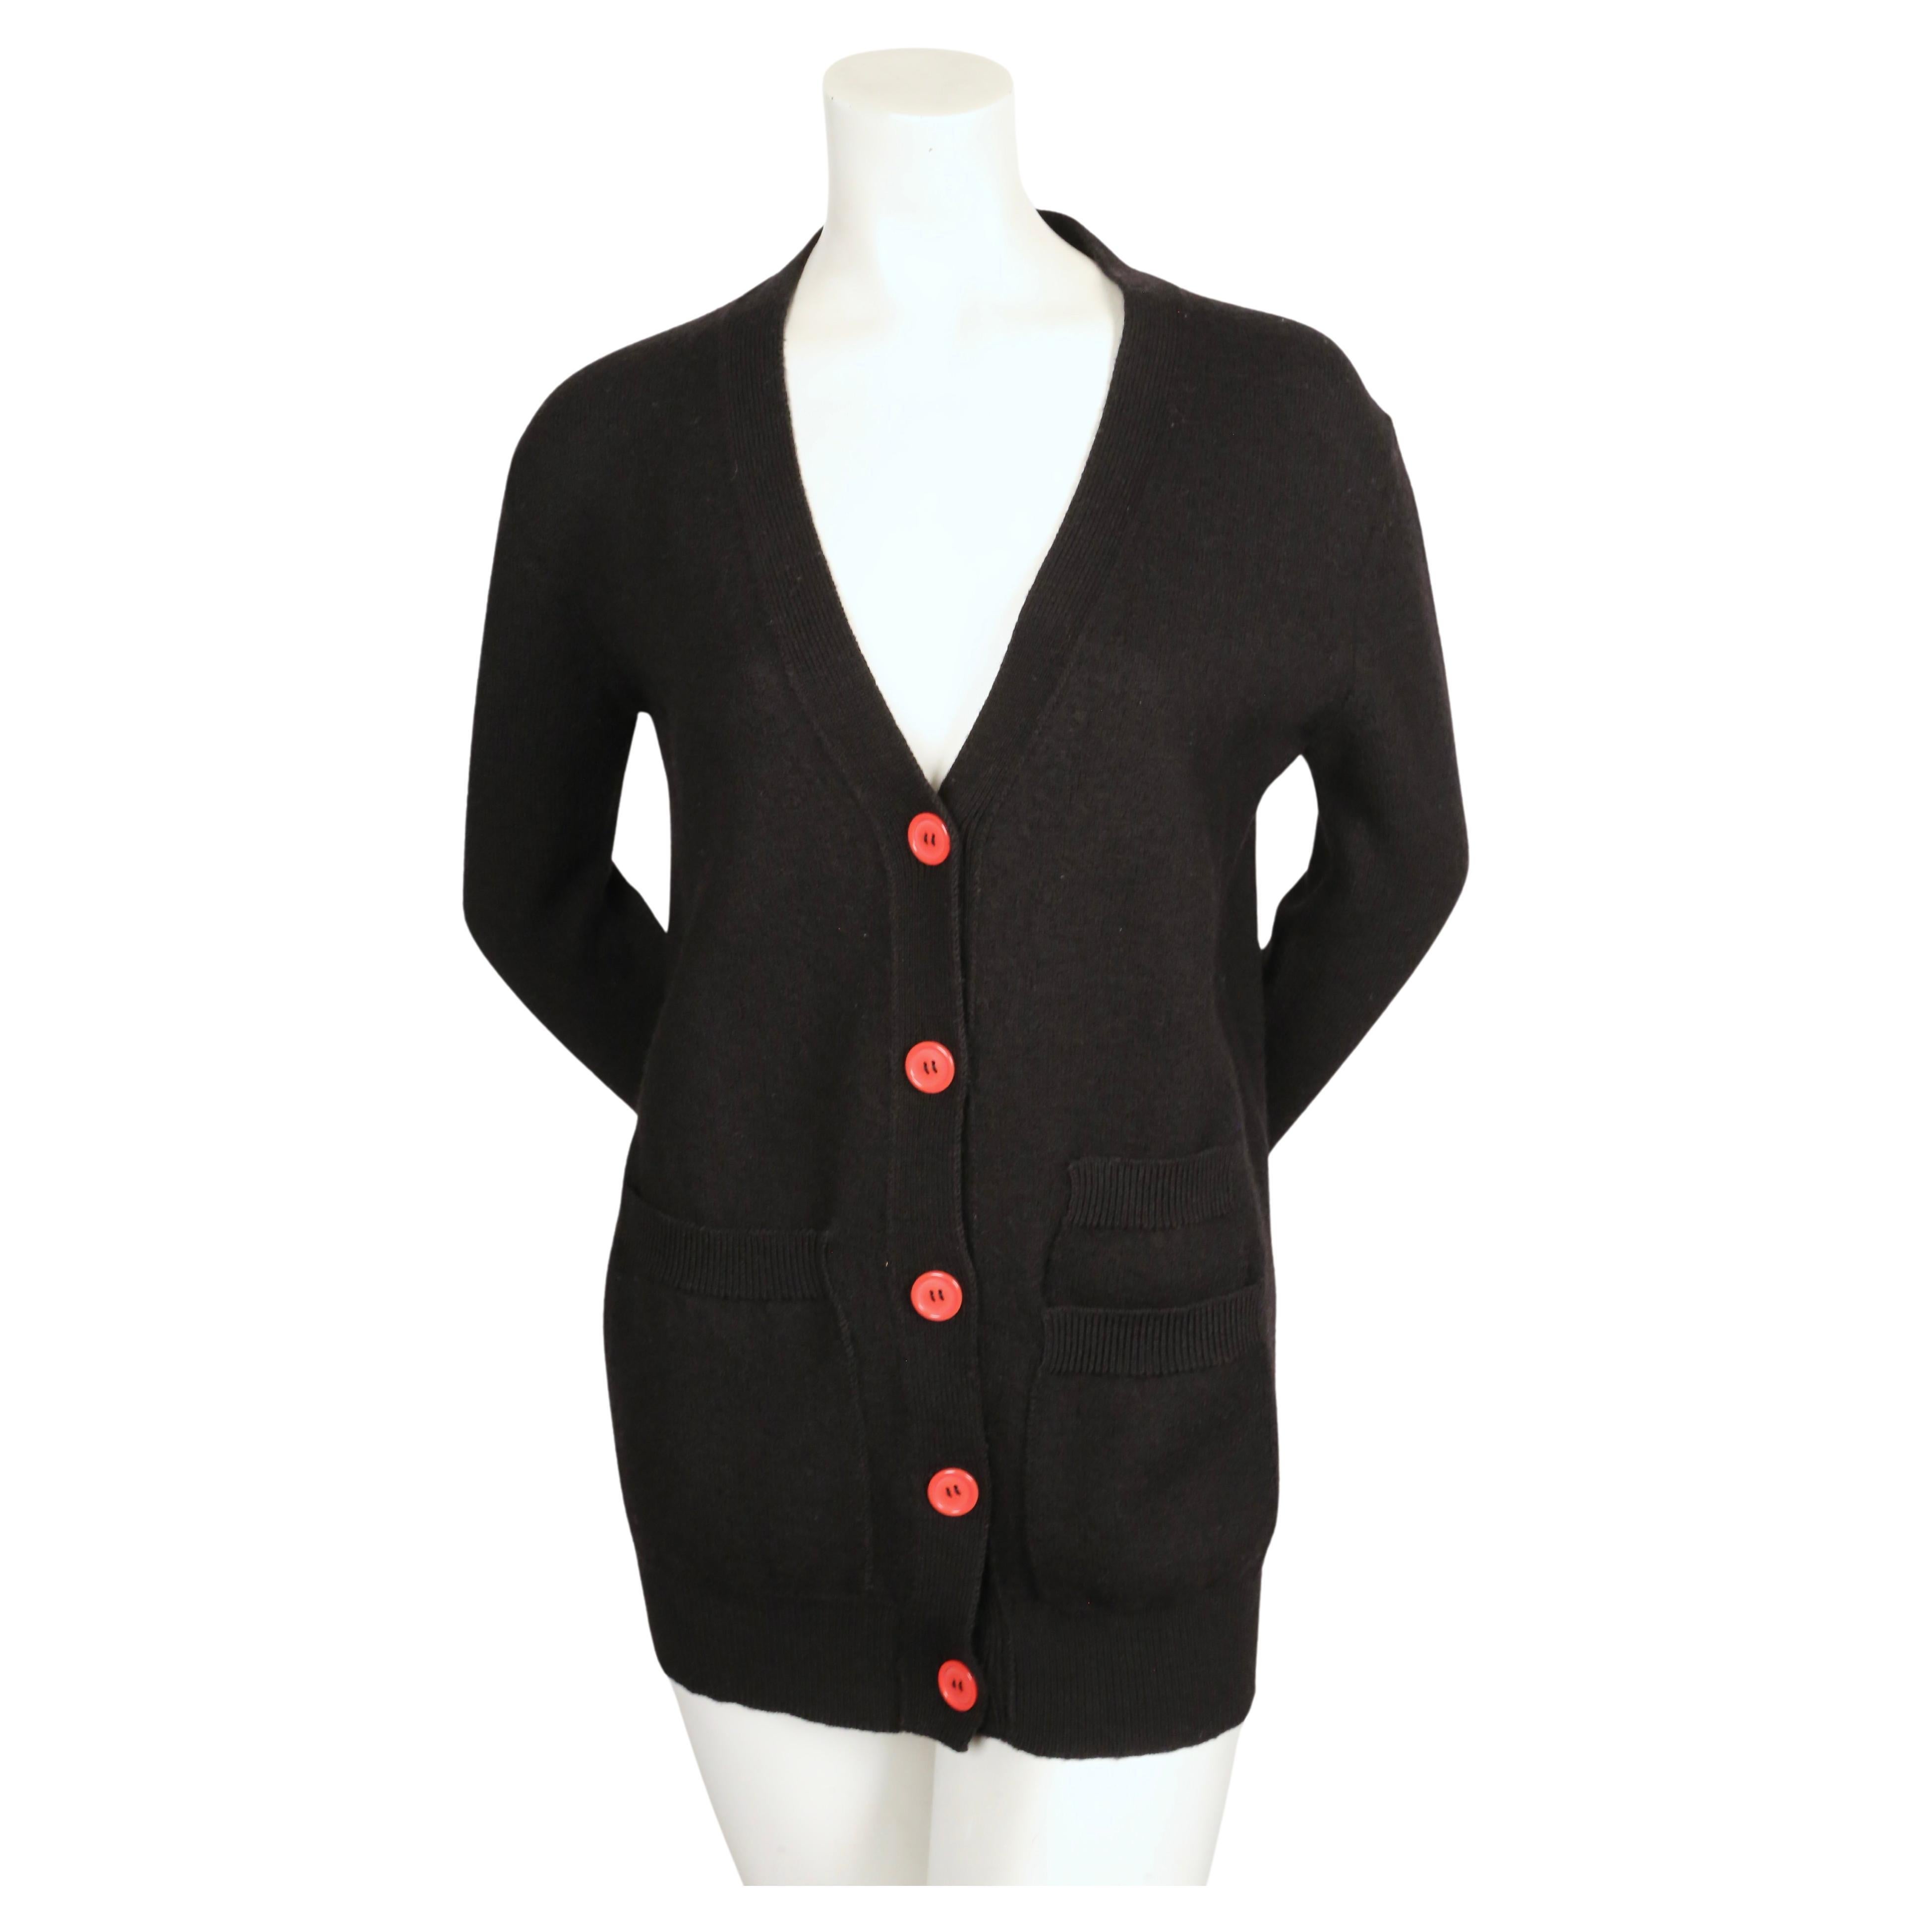 Black, boucle knit cardigan with extra long arms and red buttons designed by Phoebe Philo for Celine. Size 'XS'.  Approximate measurements: (unstretched): drop shoulders 19